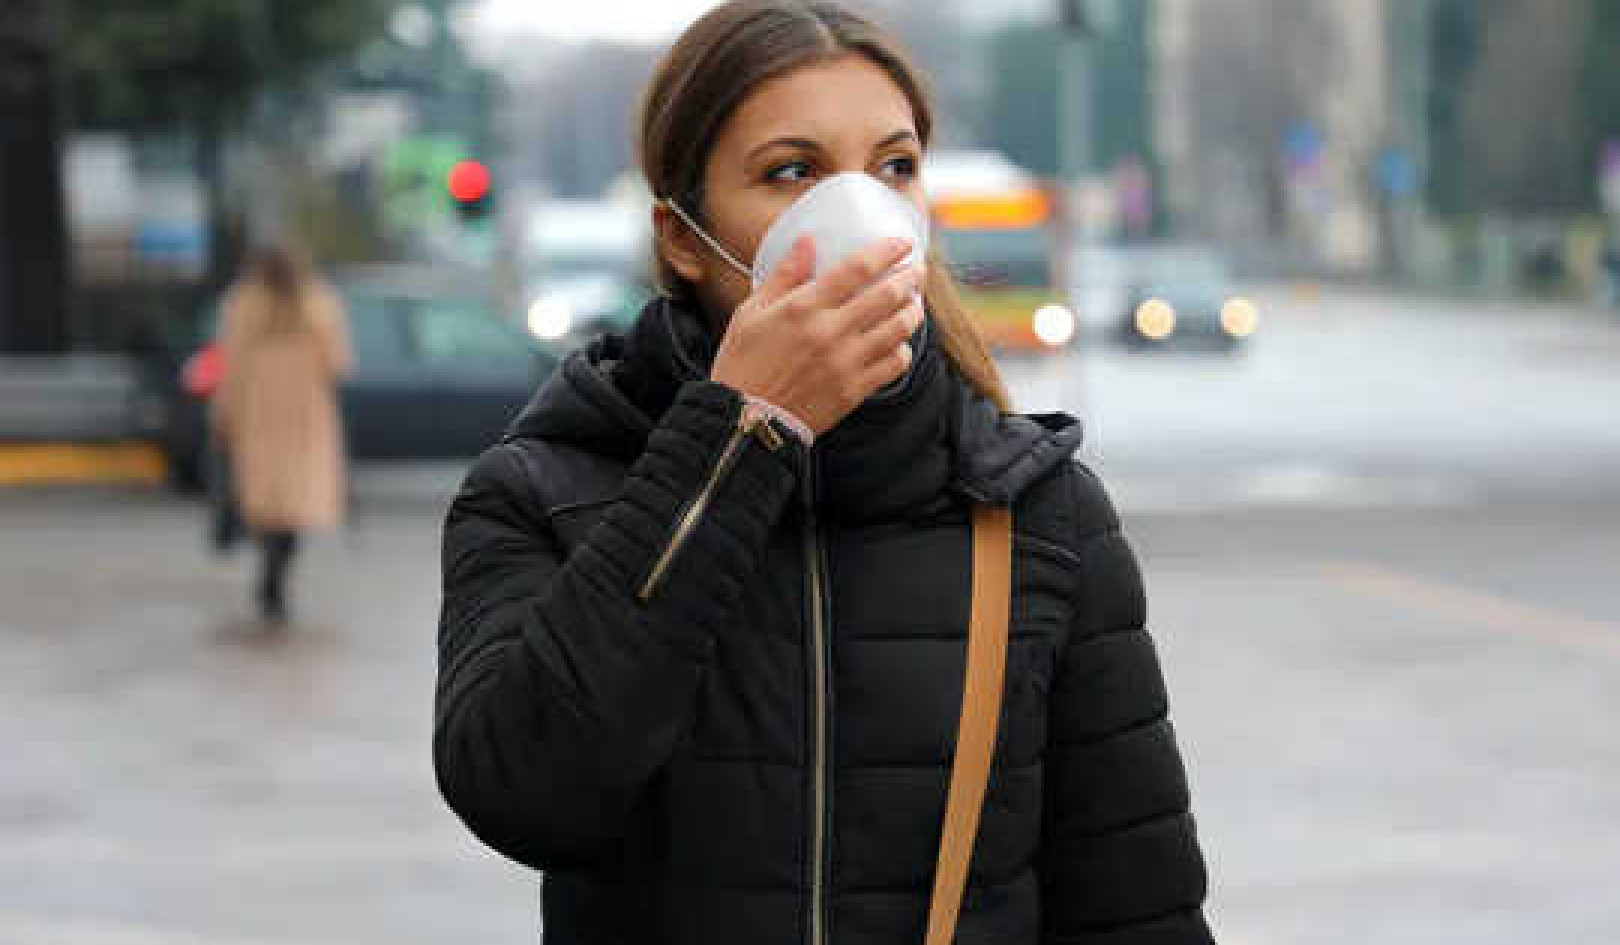 Air Pollution Exposure Linked To Higher Covid-19 Cases and Deaths?